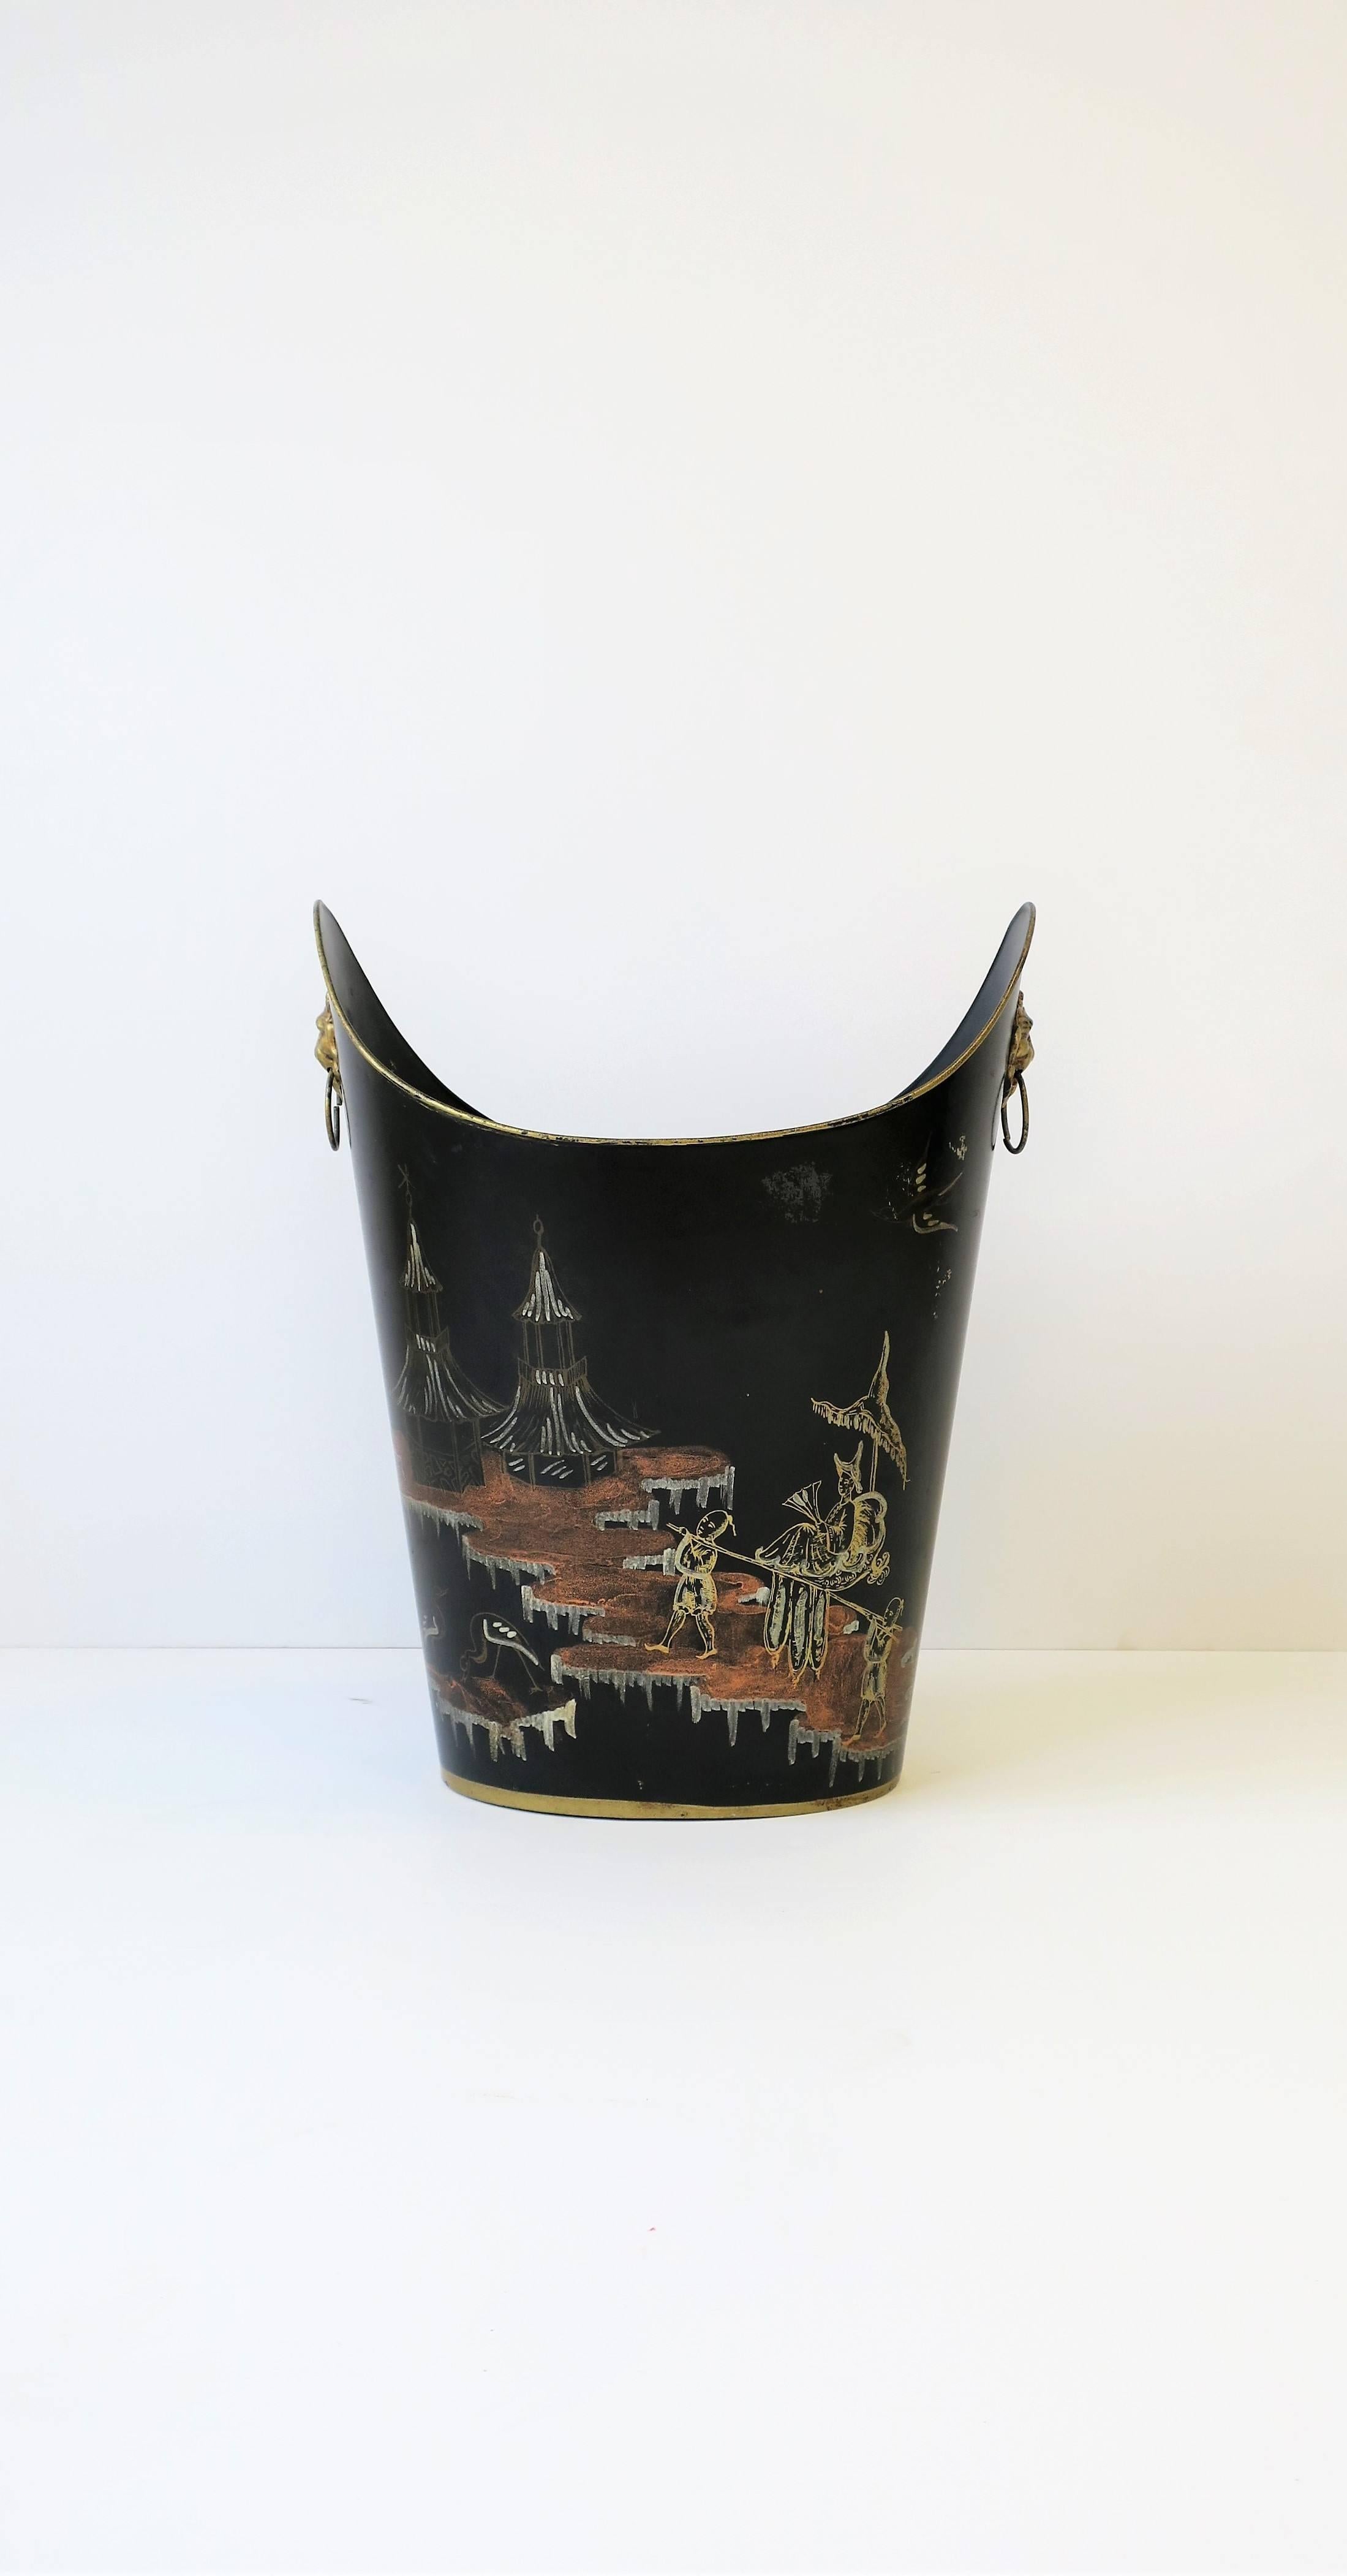 A beautiful Midcentury Italian black and gold wastebasket [waste basket] or trash can with a hand-painted chinoiserie design and lion head detail on sides, between early and Mid-20th Century, Italy. Colors include: black, gold, silver and